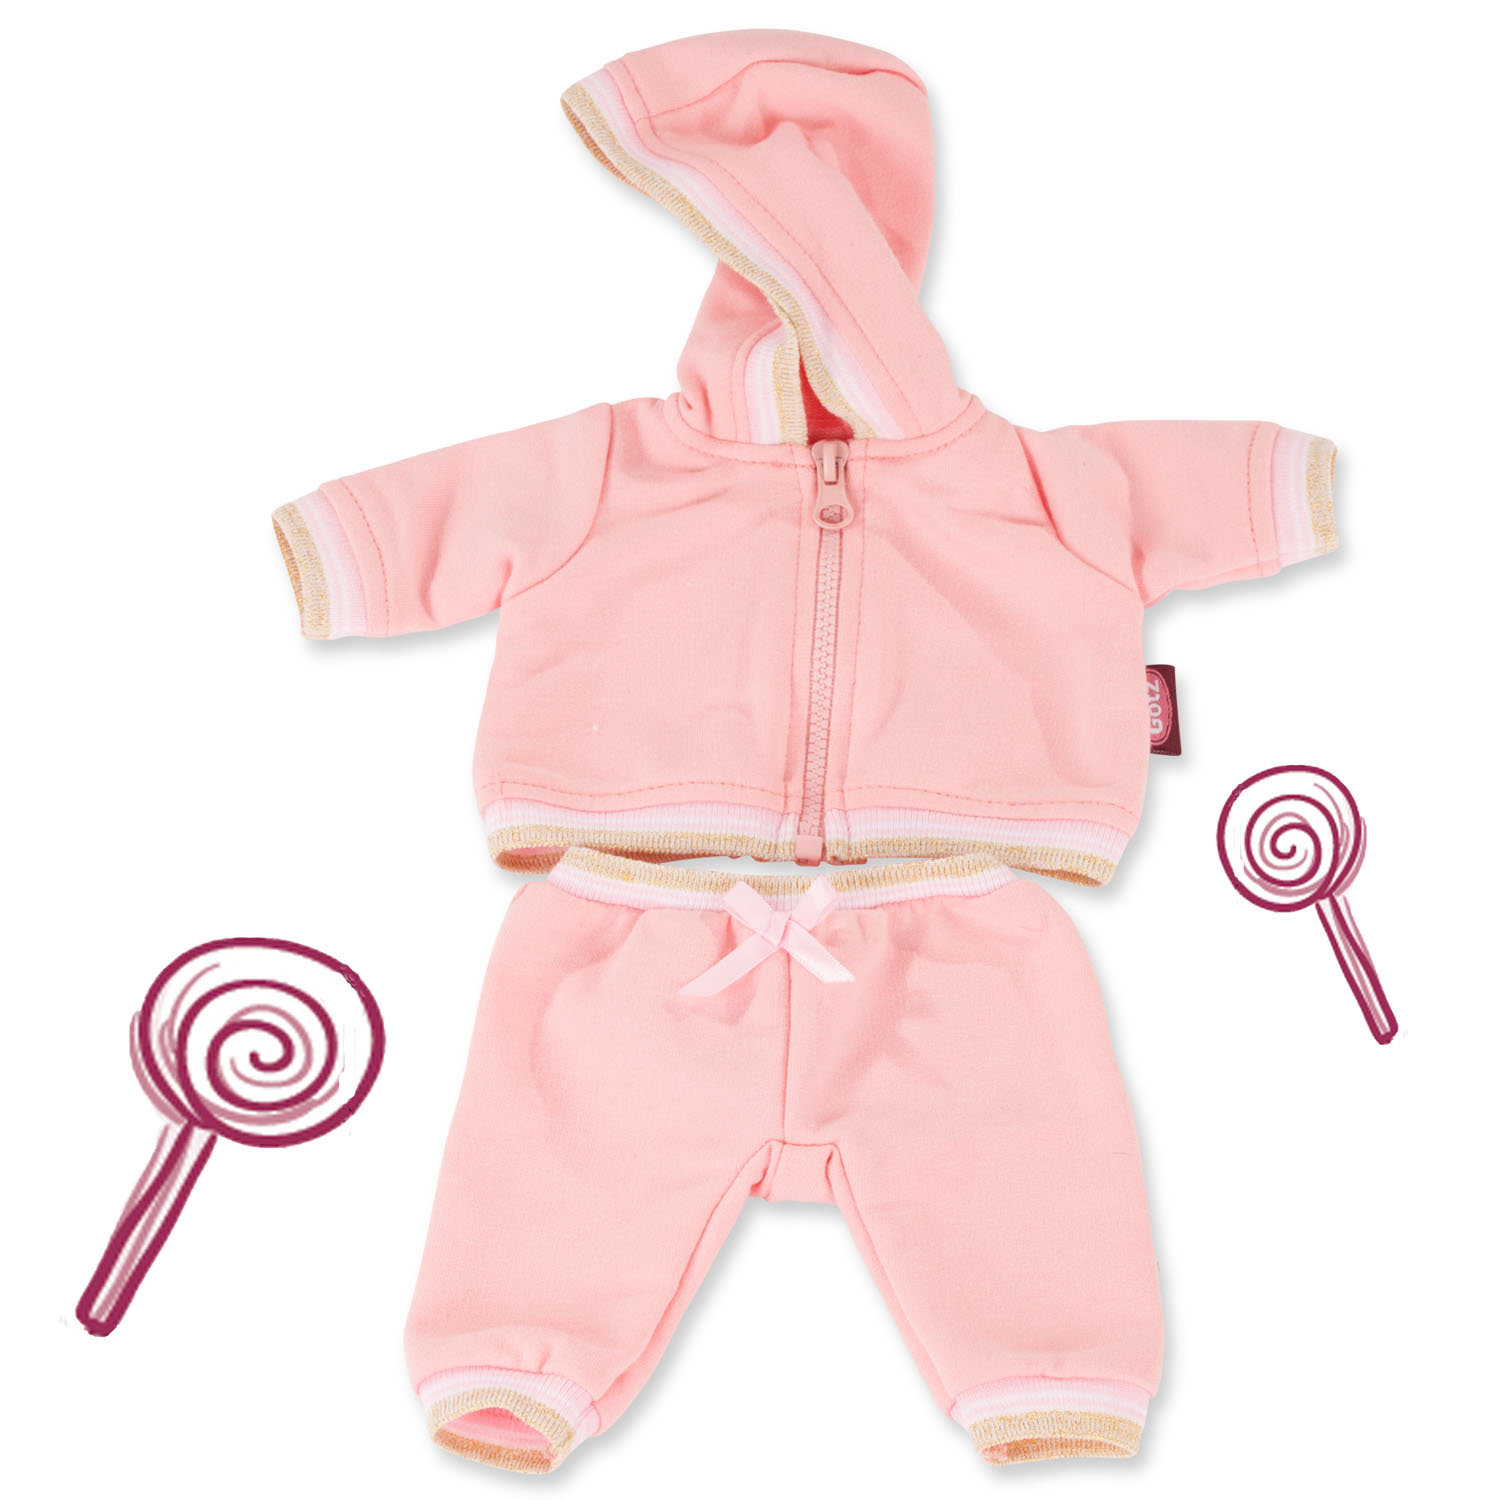 Babykombi Tracksuit Comfy In Style